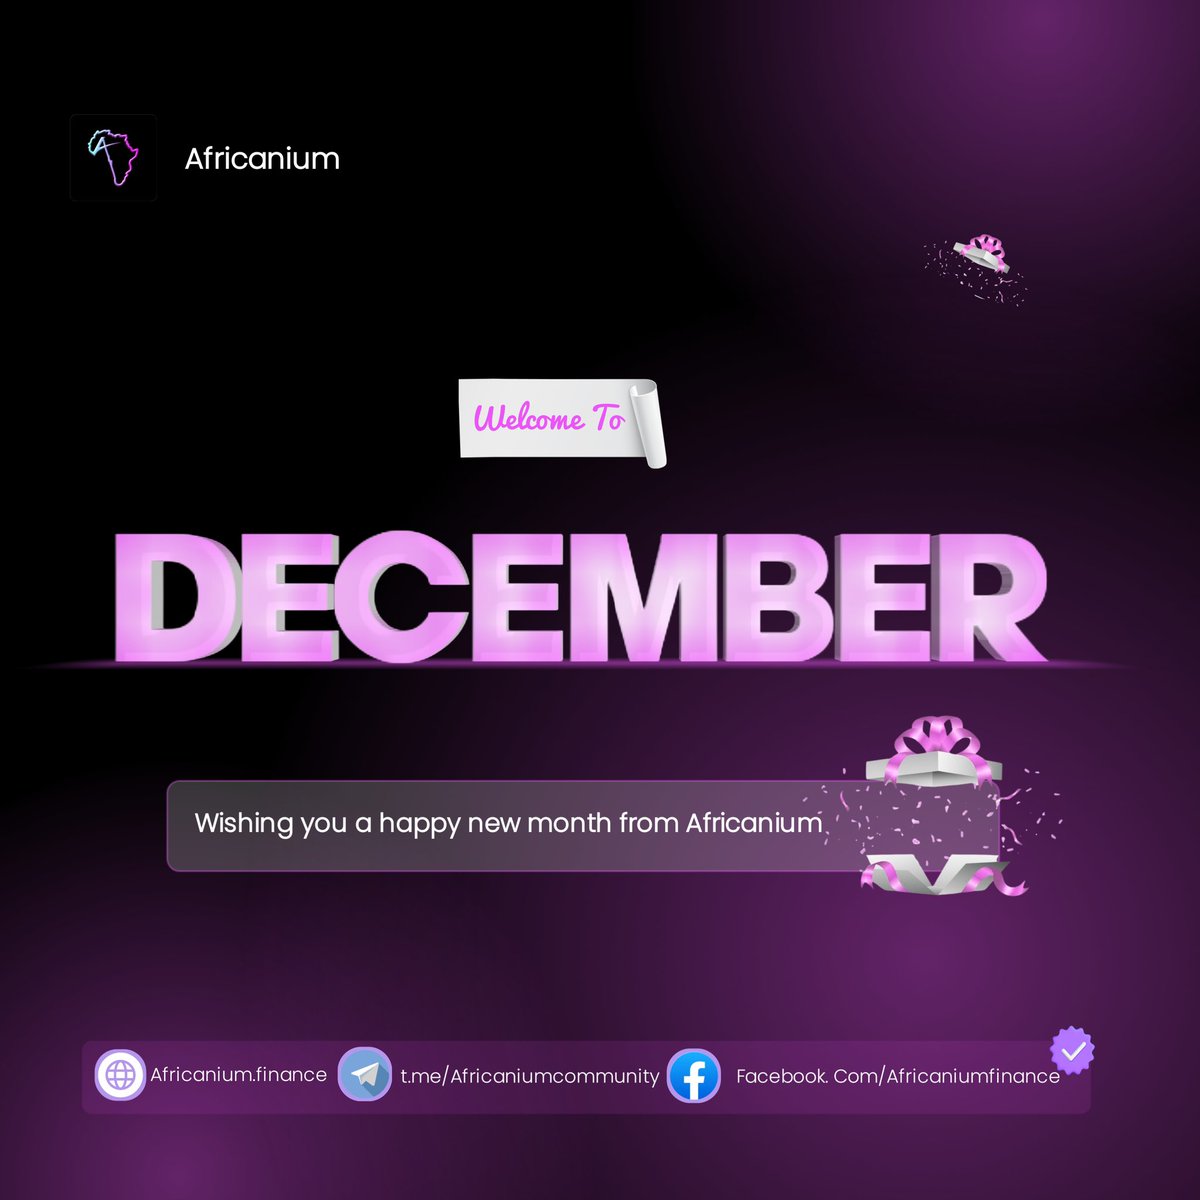 🎉 Happy December from the Africanium team! 

🌍 Wishing everyone a month filled with joy, success, and memorable moments. 

Let's make this December one to remember! 🎄✨ #HappyNewMonth #DecemberVibes #AfricaniumTeam